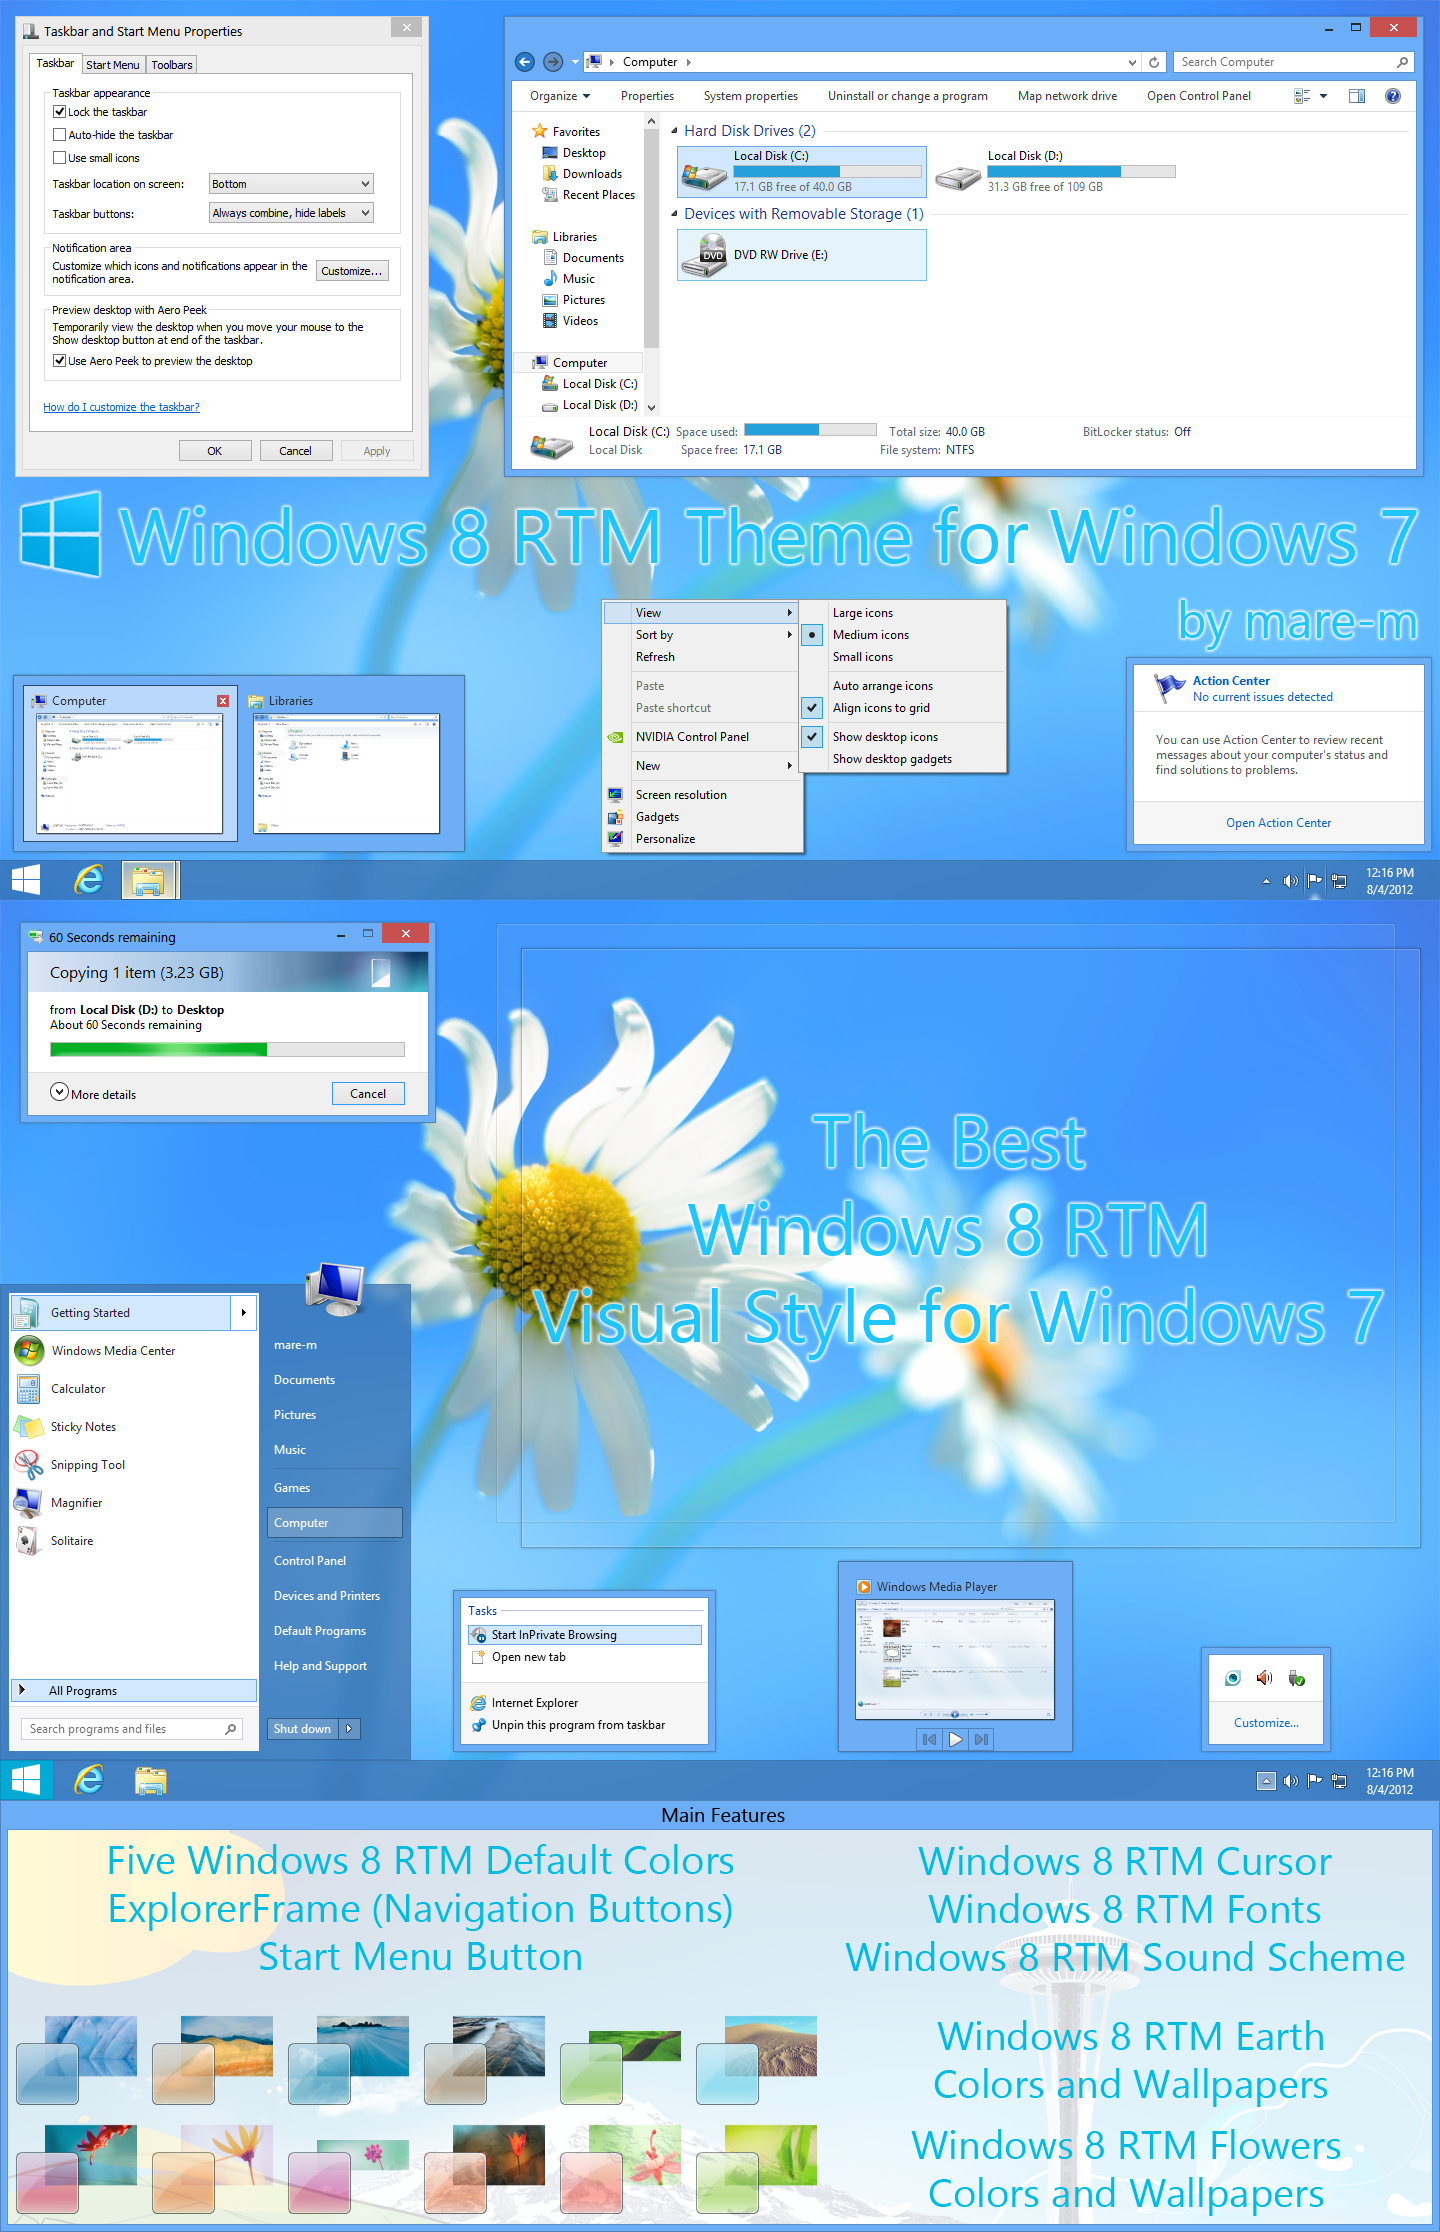 windows_8_rtm_theme_for_windows_7_by_mare_m-d59vtny.png